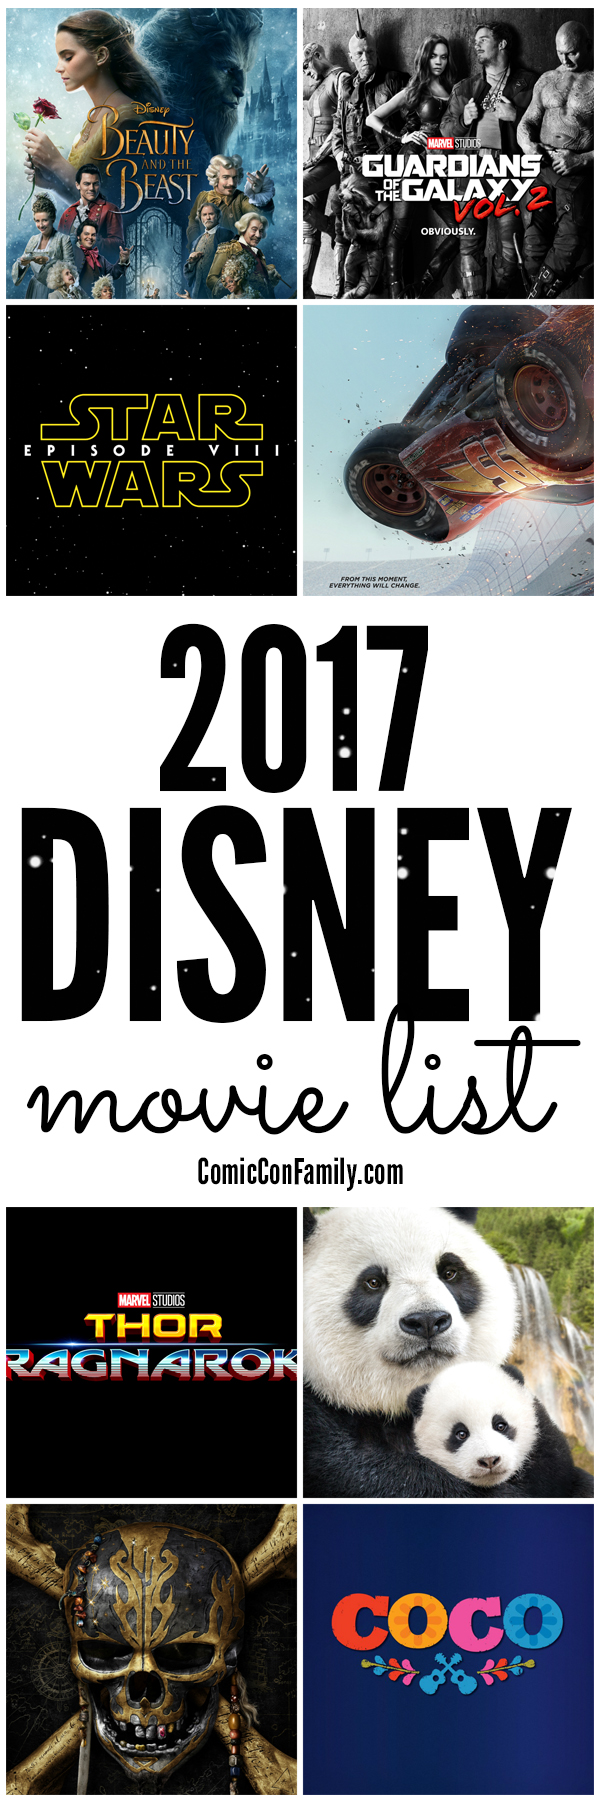 2017 Disney Movie List - Trailers, Movie Posters, Release Dates